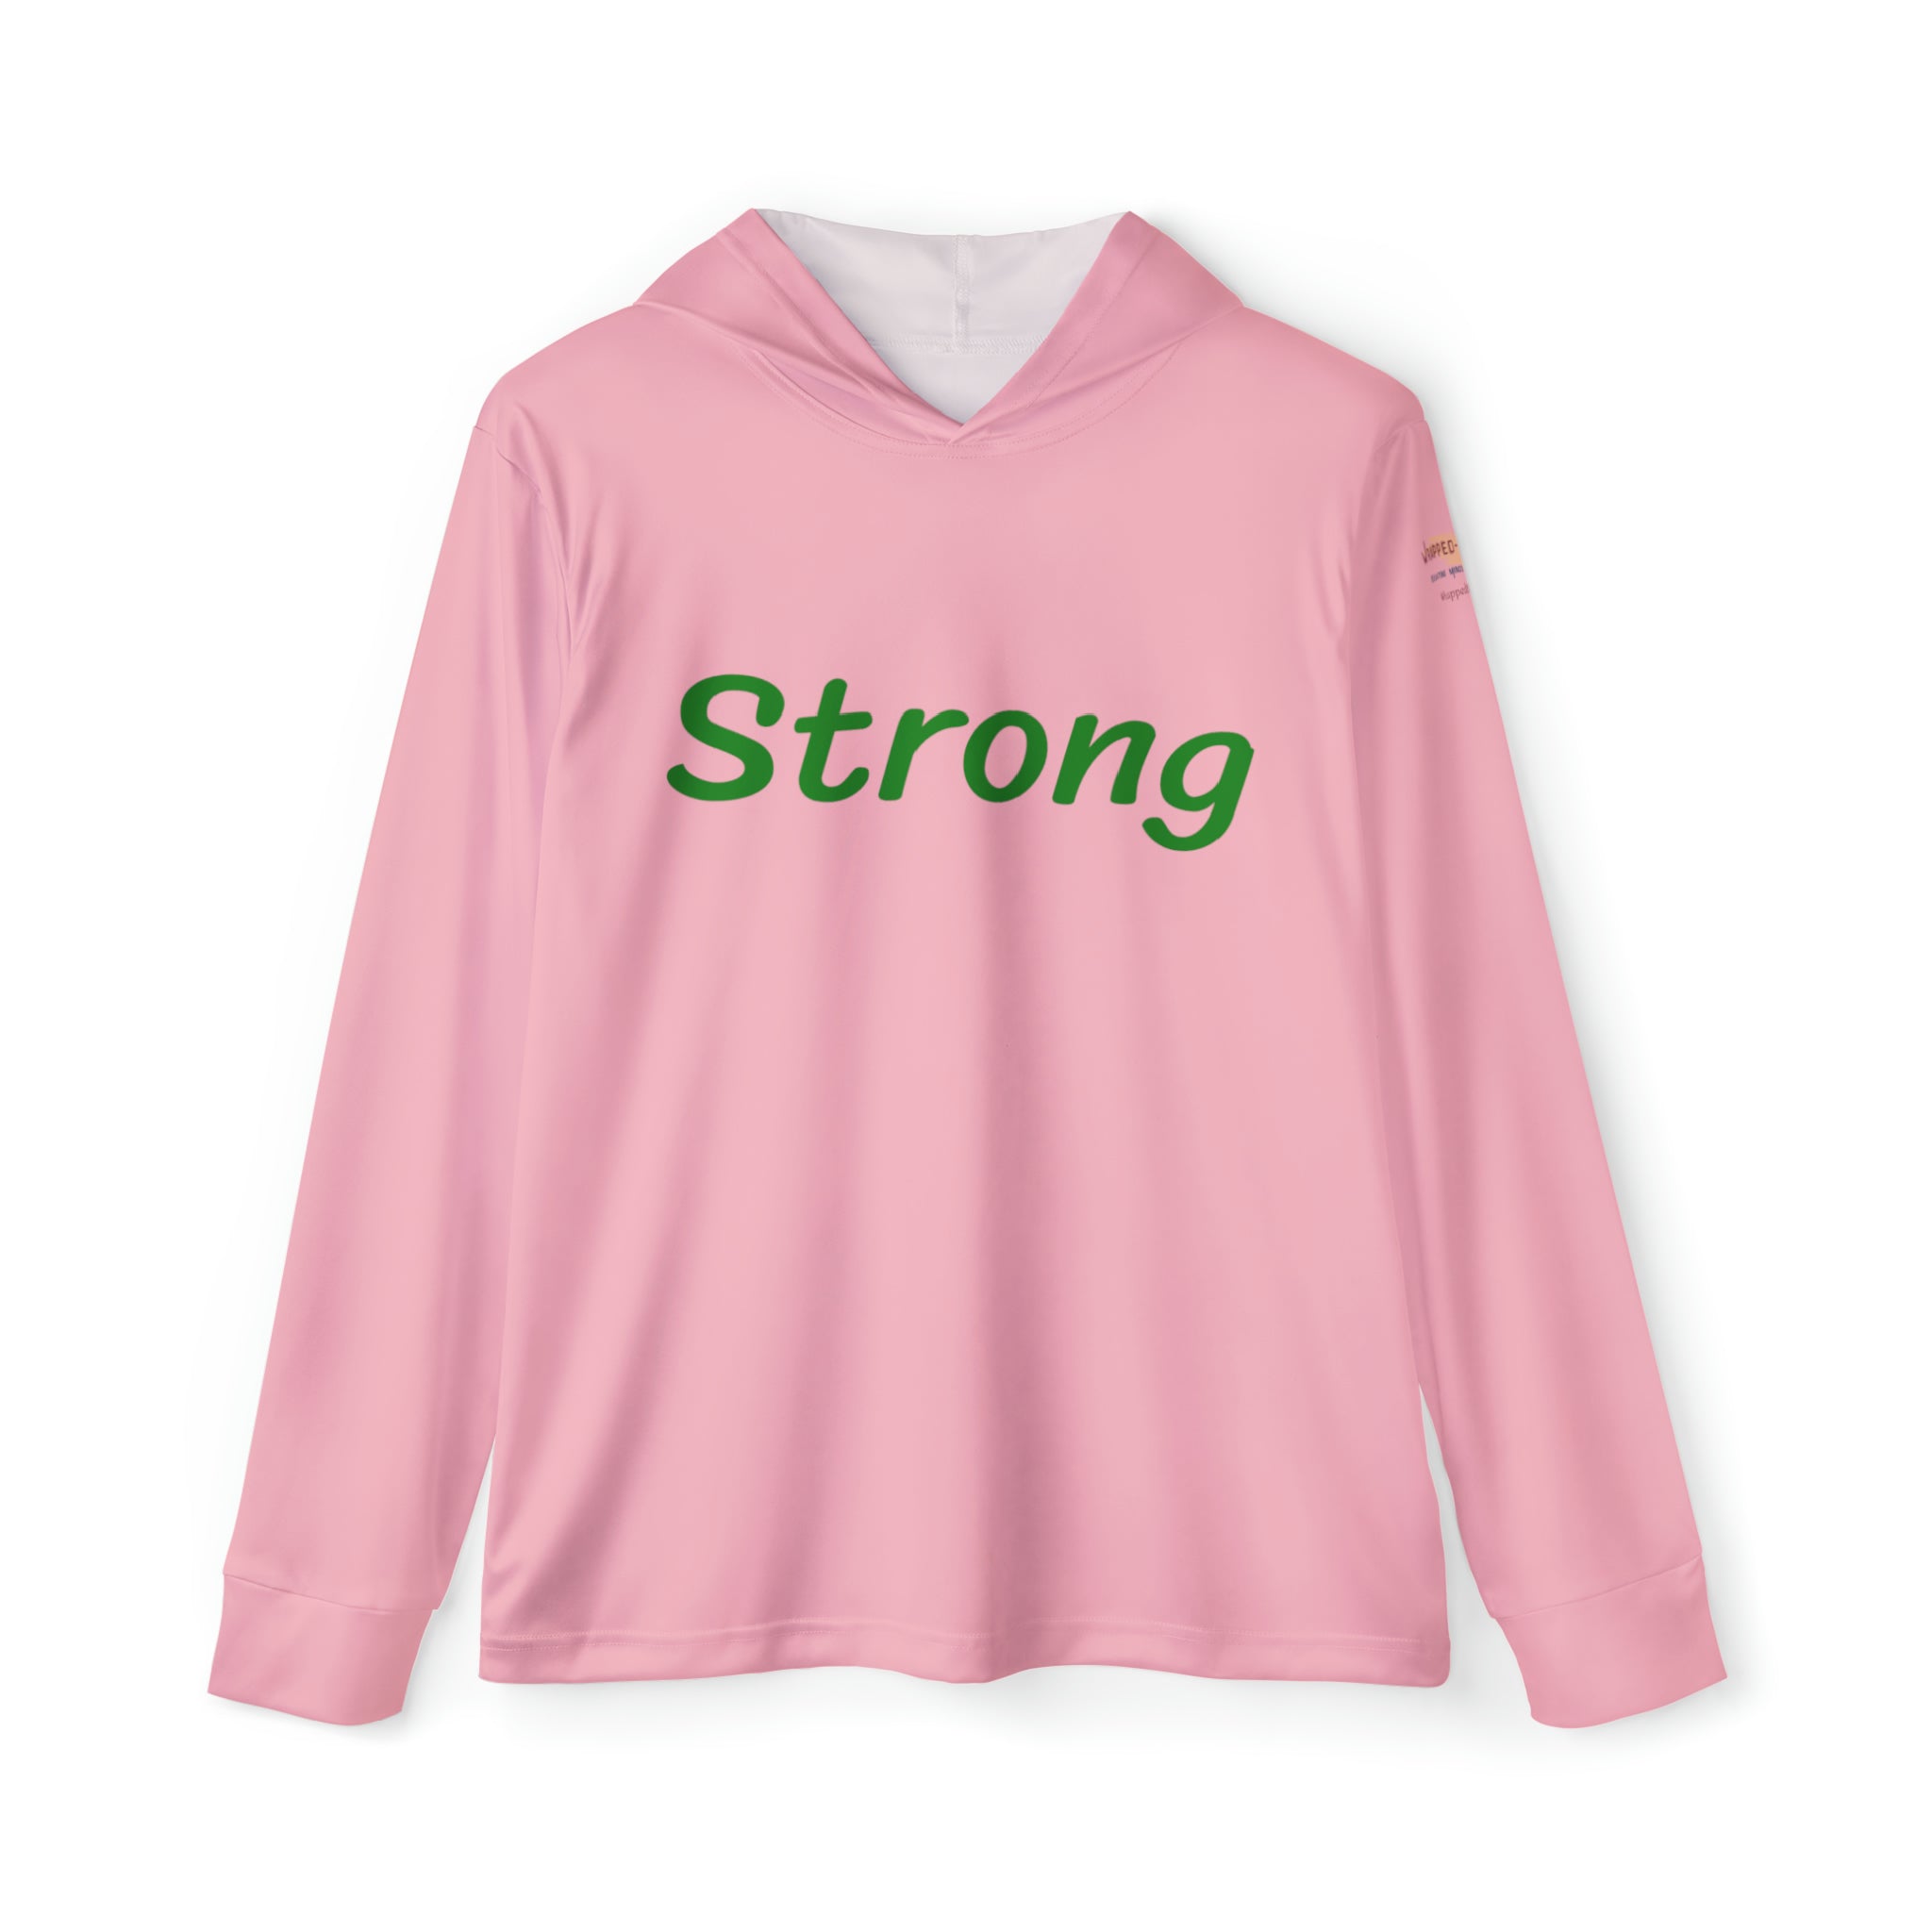 Strong Men's Warmup Hoodie: Unleash Your Strength Activewear Durable Fabric Made in USA Men's Hoodie Mental Health Support Moisture-wicking Performance Apparel Quality Control Sports Warmup UPF 50+ All Over Prints 5992403598587443174_2048 Printify